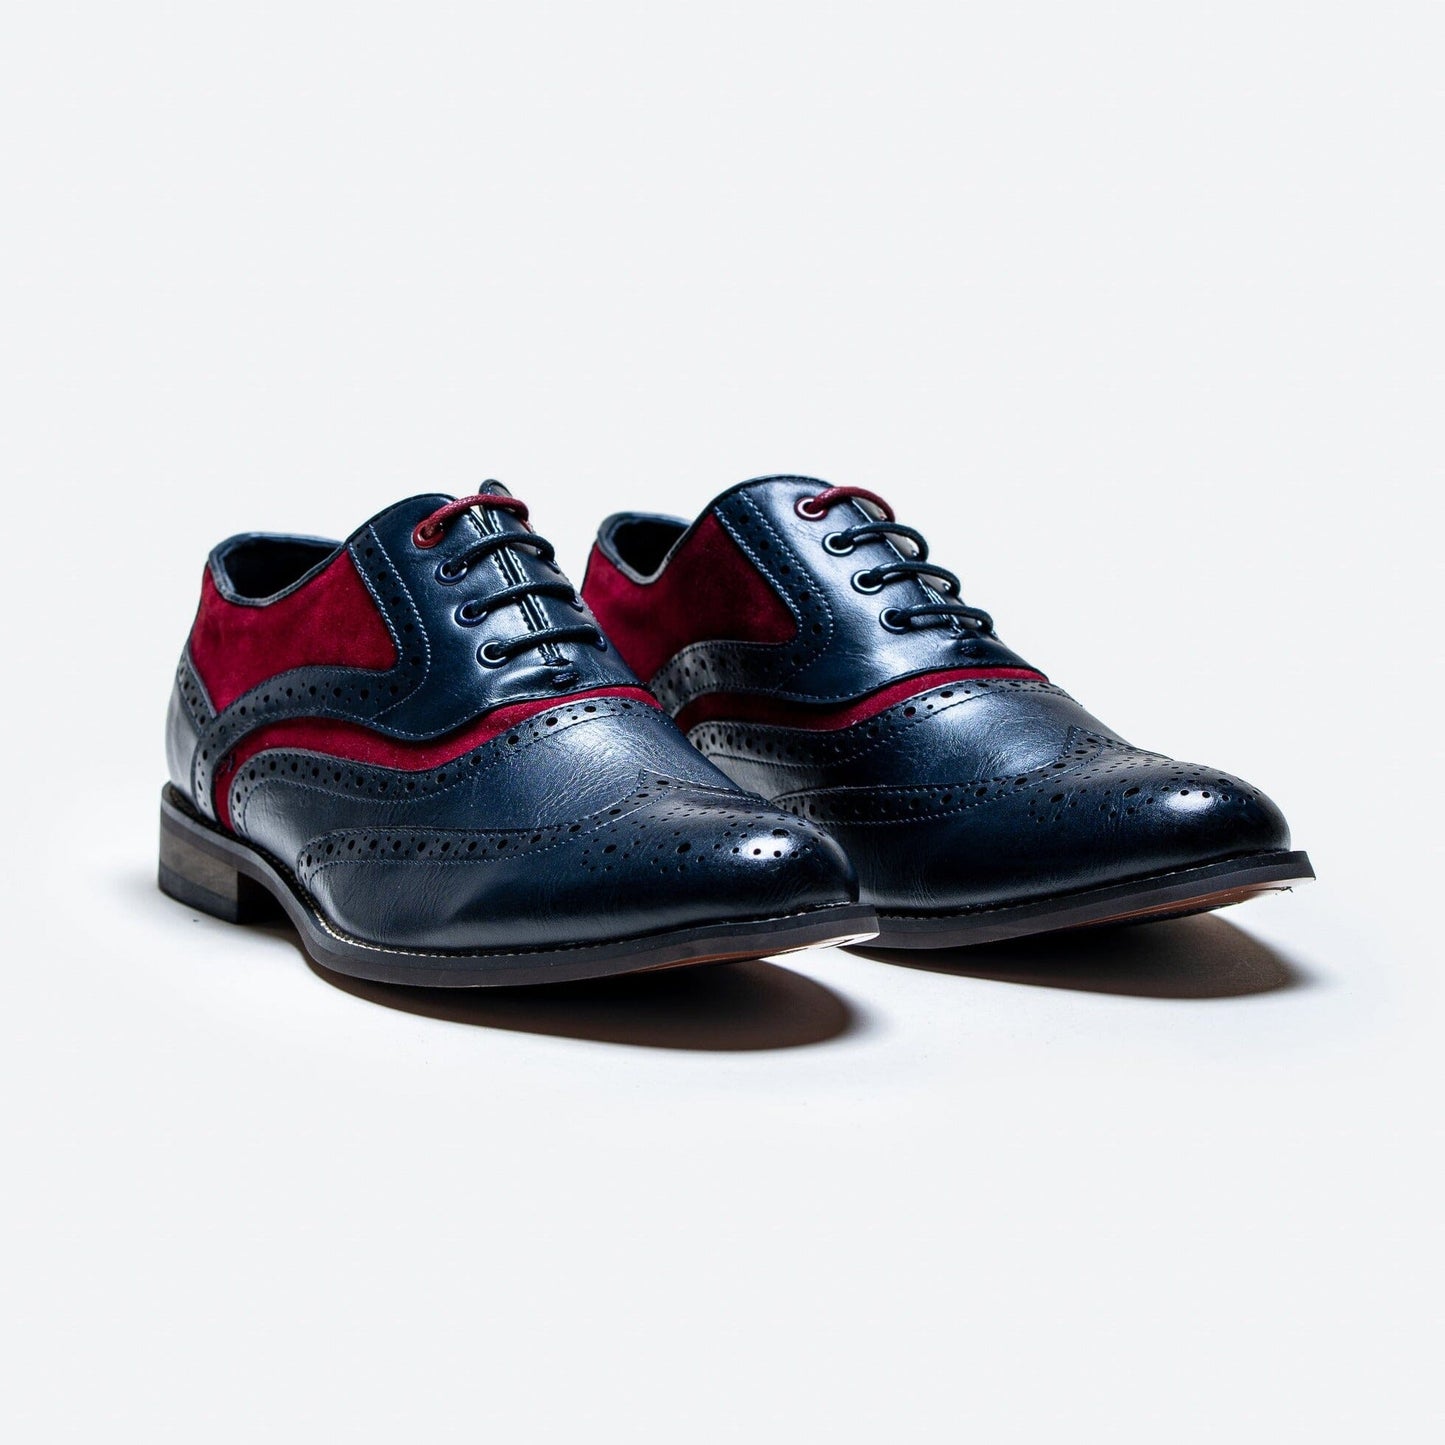 Russel Navy & Red Brogue Shoes - Shoes - - THREADPEPPER